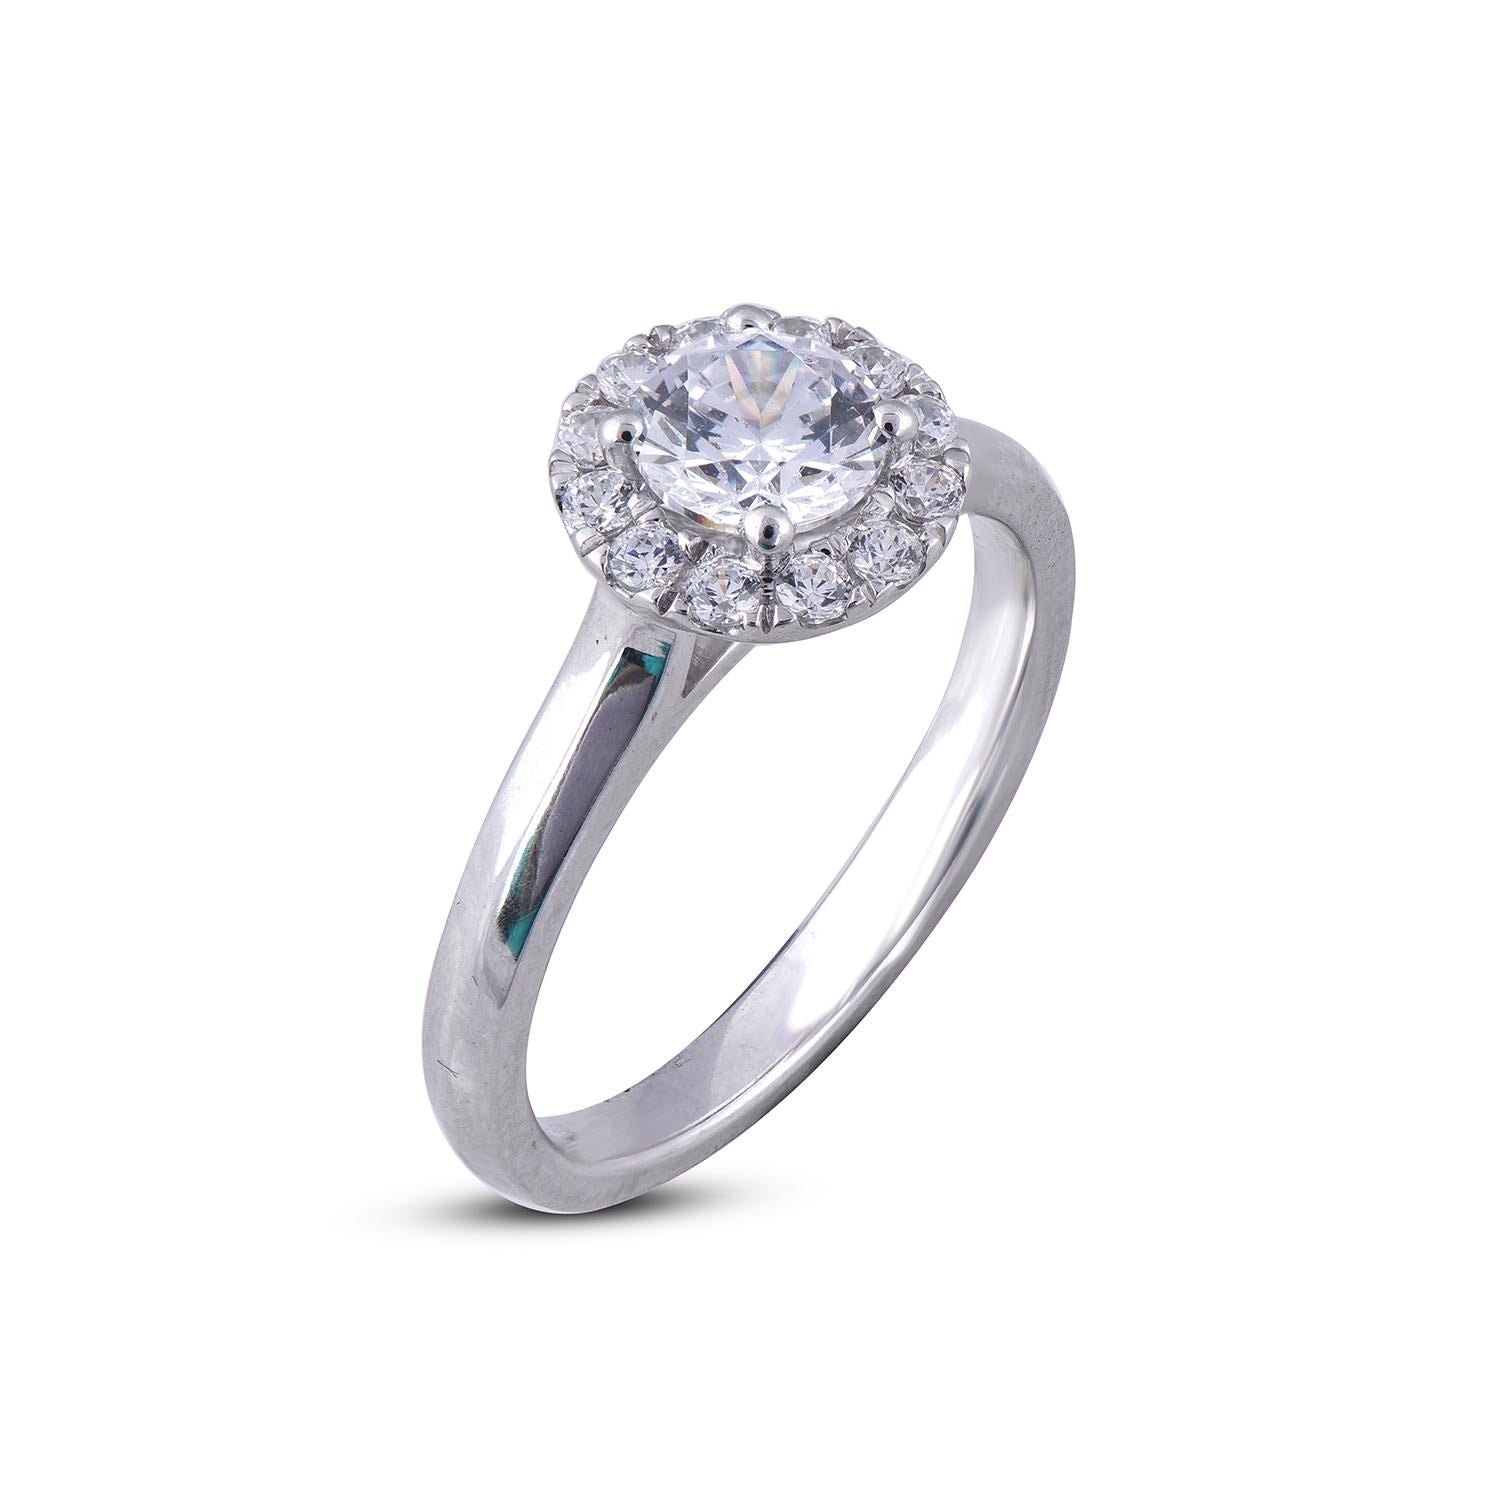 Exquisitely designed diamond engagement wedding ring studded with 0.75ct of Roung ceter stone and 0.25ct of 13 diamonds set on frame in Prong setting, crafted in 18 karat White gold. Diamonds are graded G-H Color, SI1-2 Clarity.
